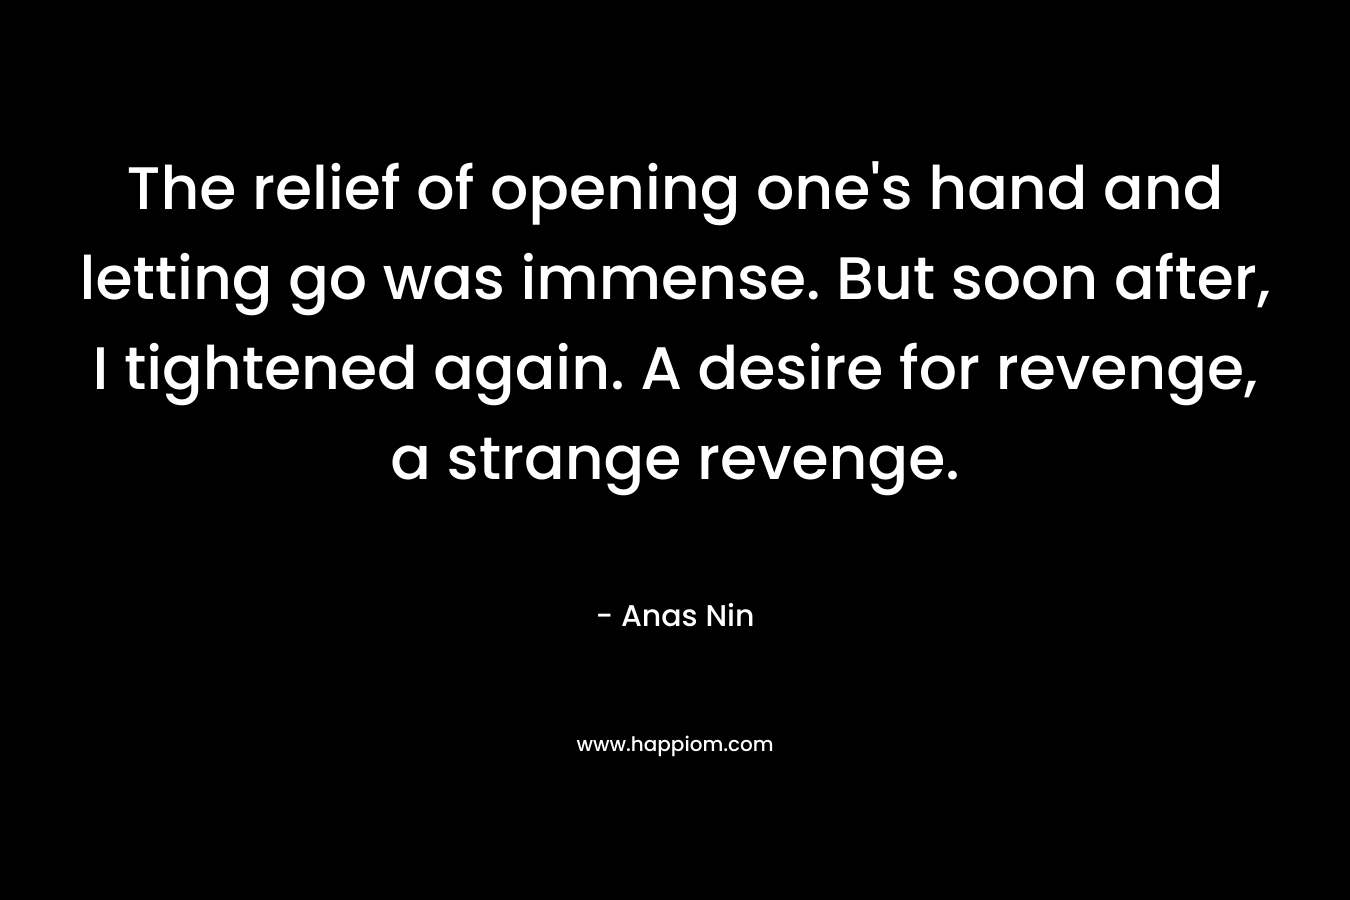 The relief of opening one’s hand and letting go was immense. But soon after, I tightened again. A desire for revenge, a strange revenge. – Anas Nin